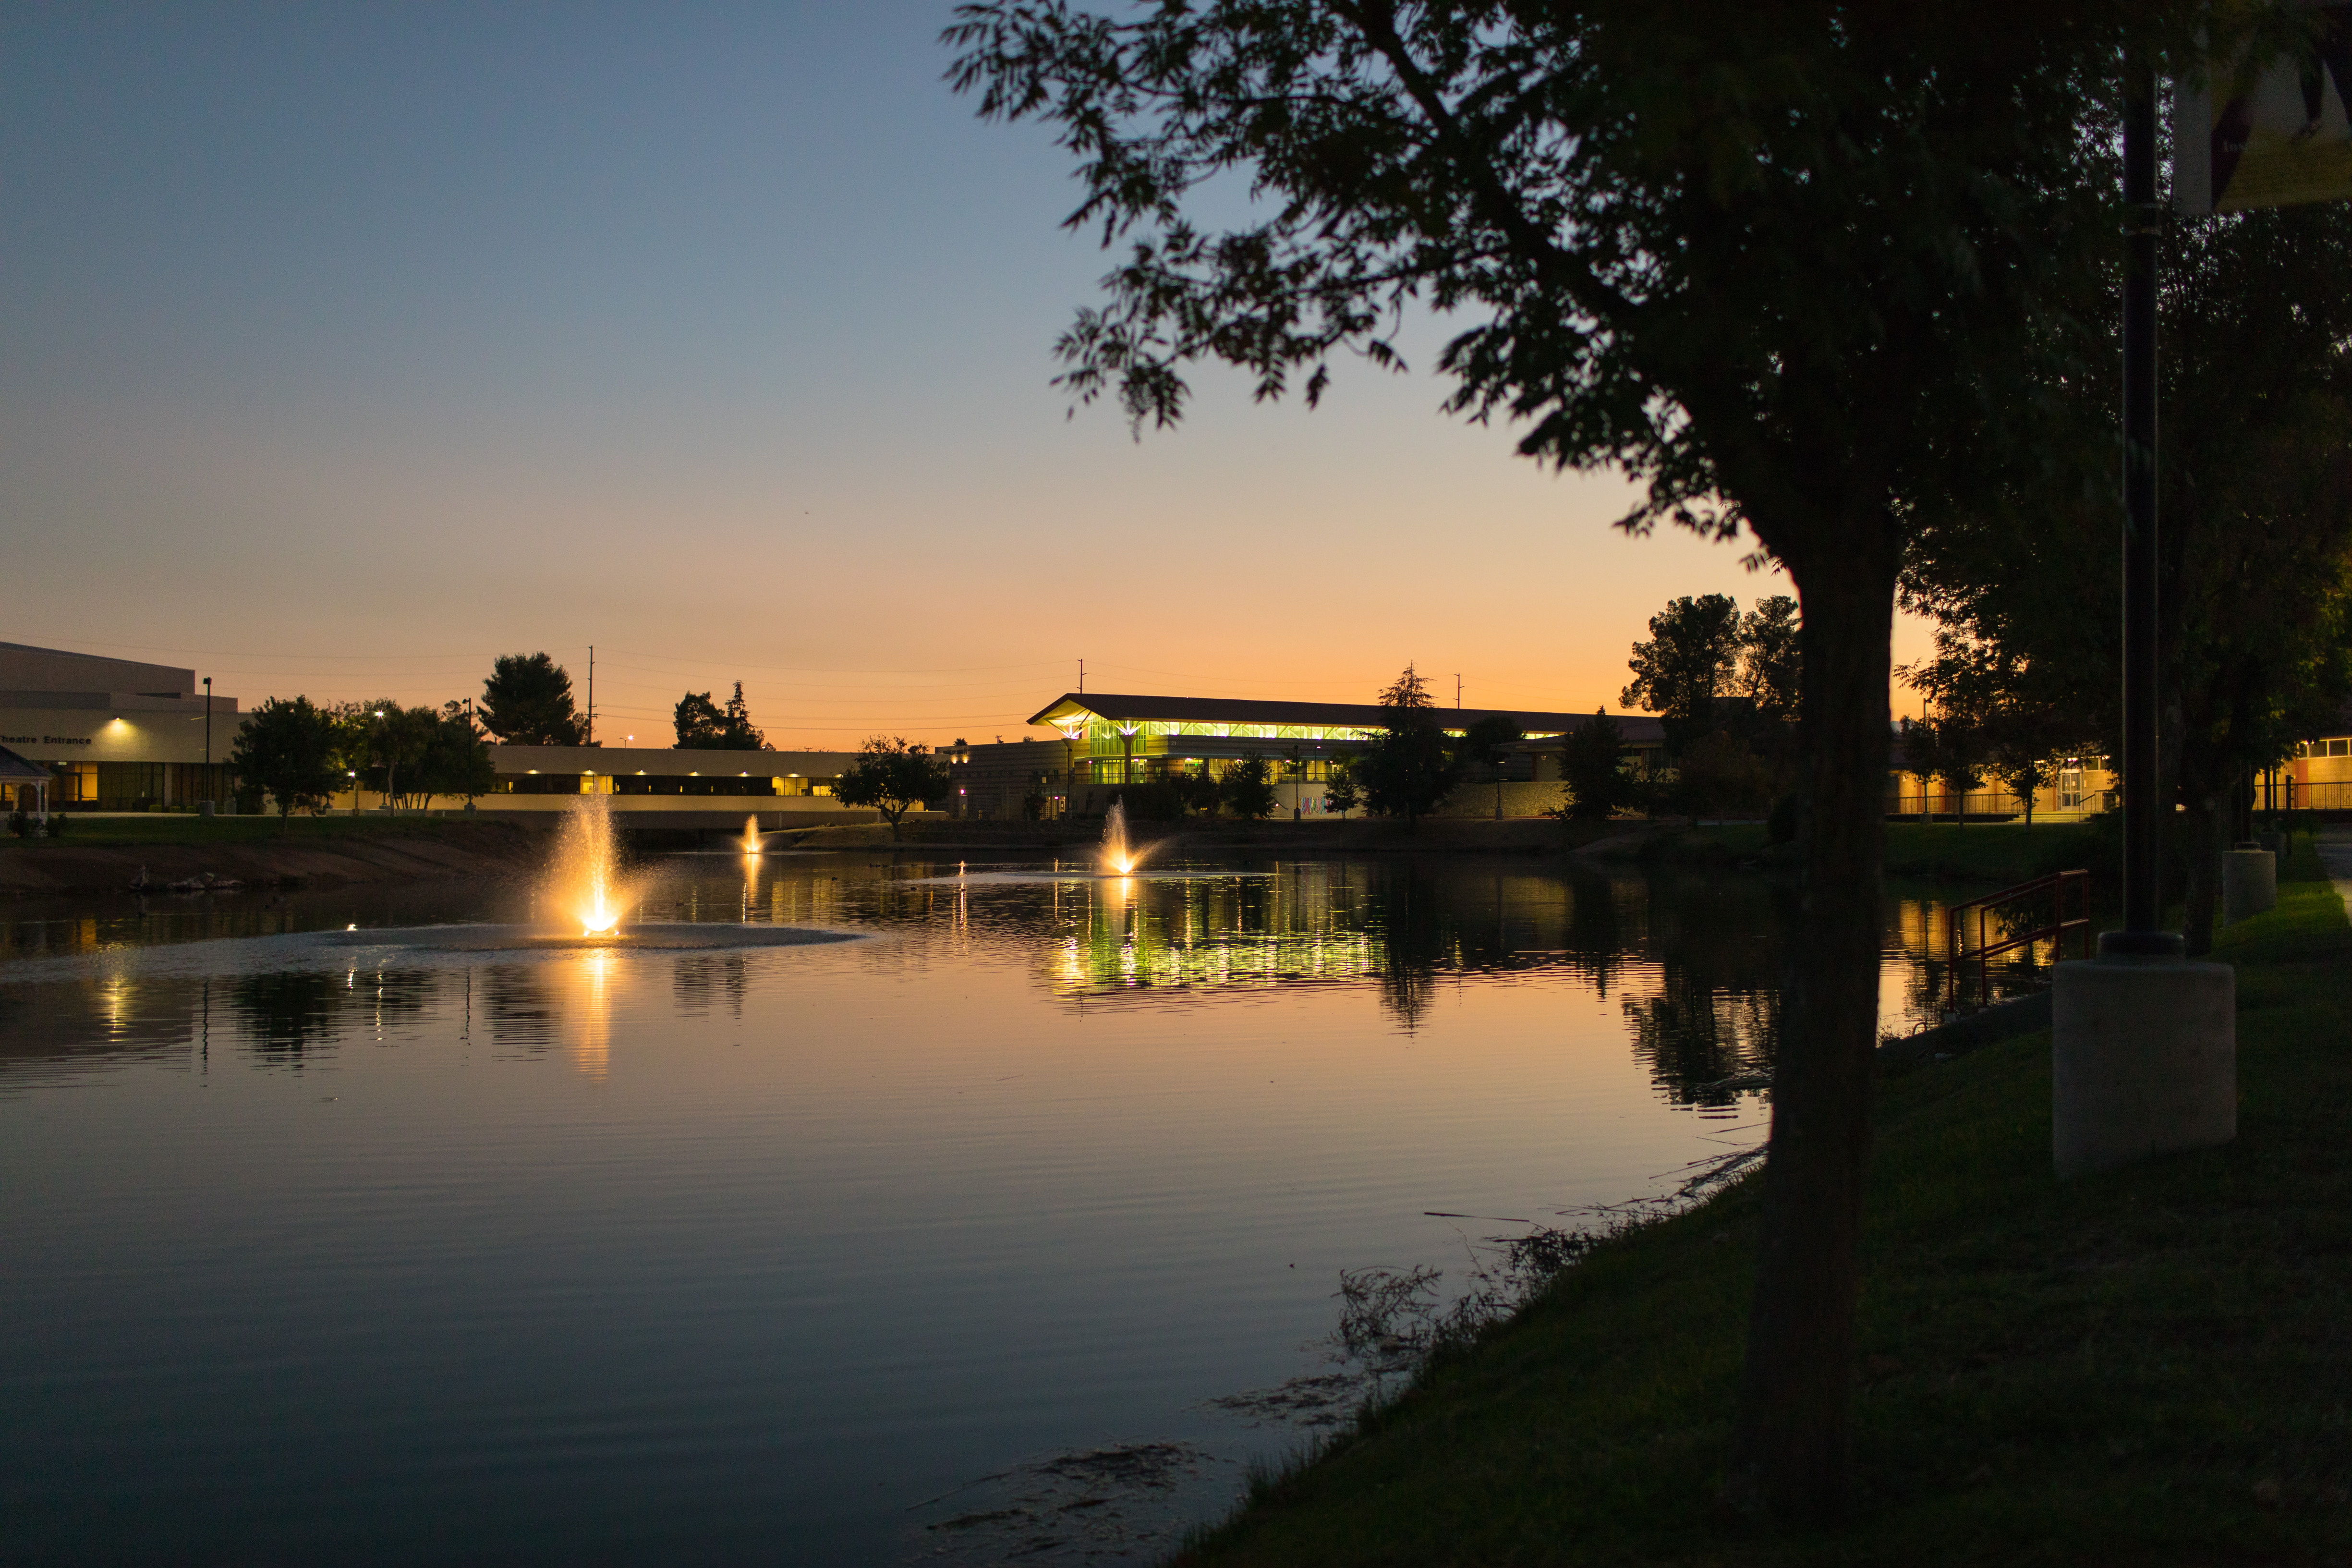 VVC campus lake at dusk with buildings in the background.